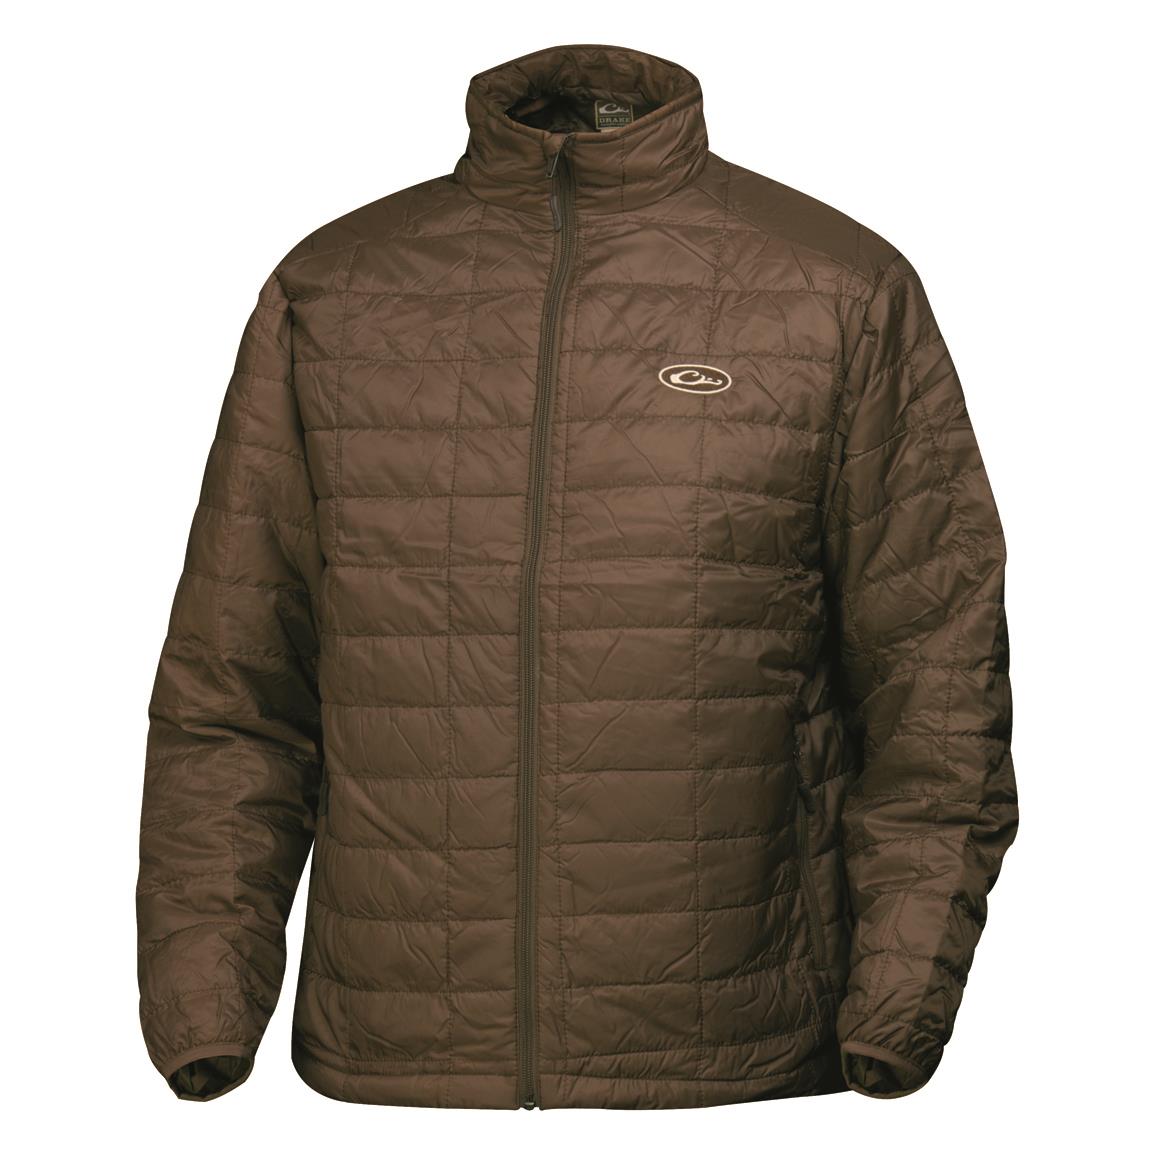 Drake Clothing Company Men's MST Synthetic Down Pac Jacket, Brown